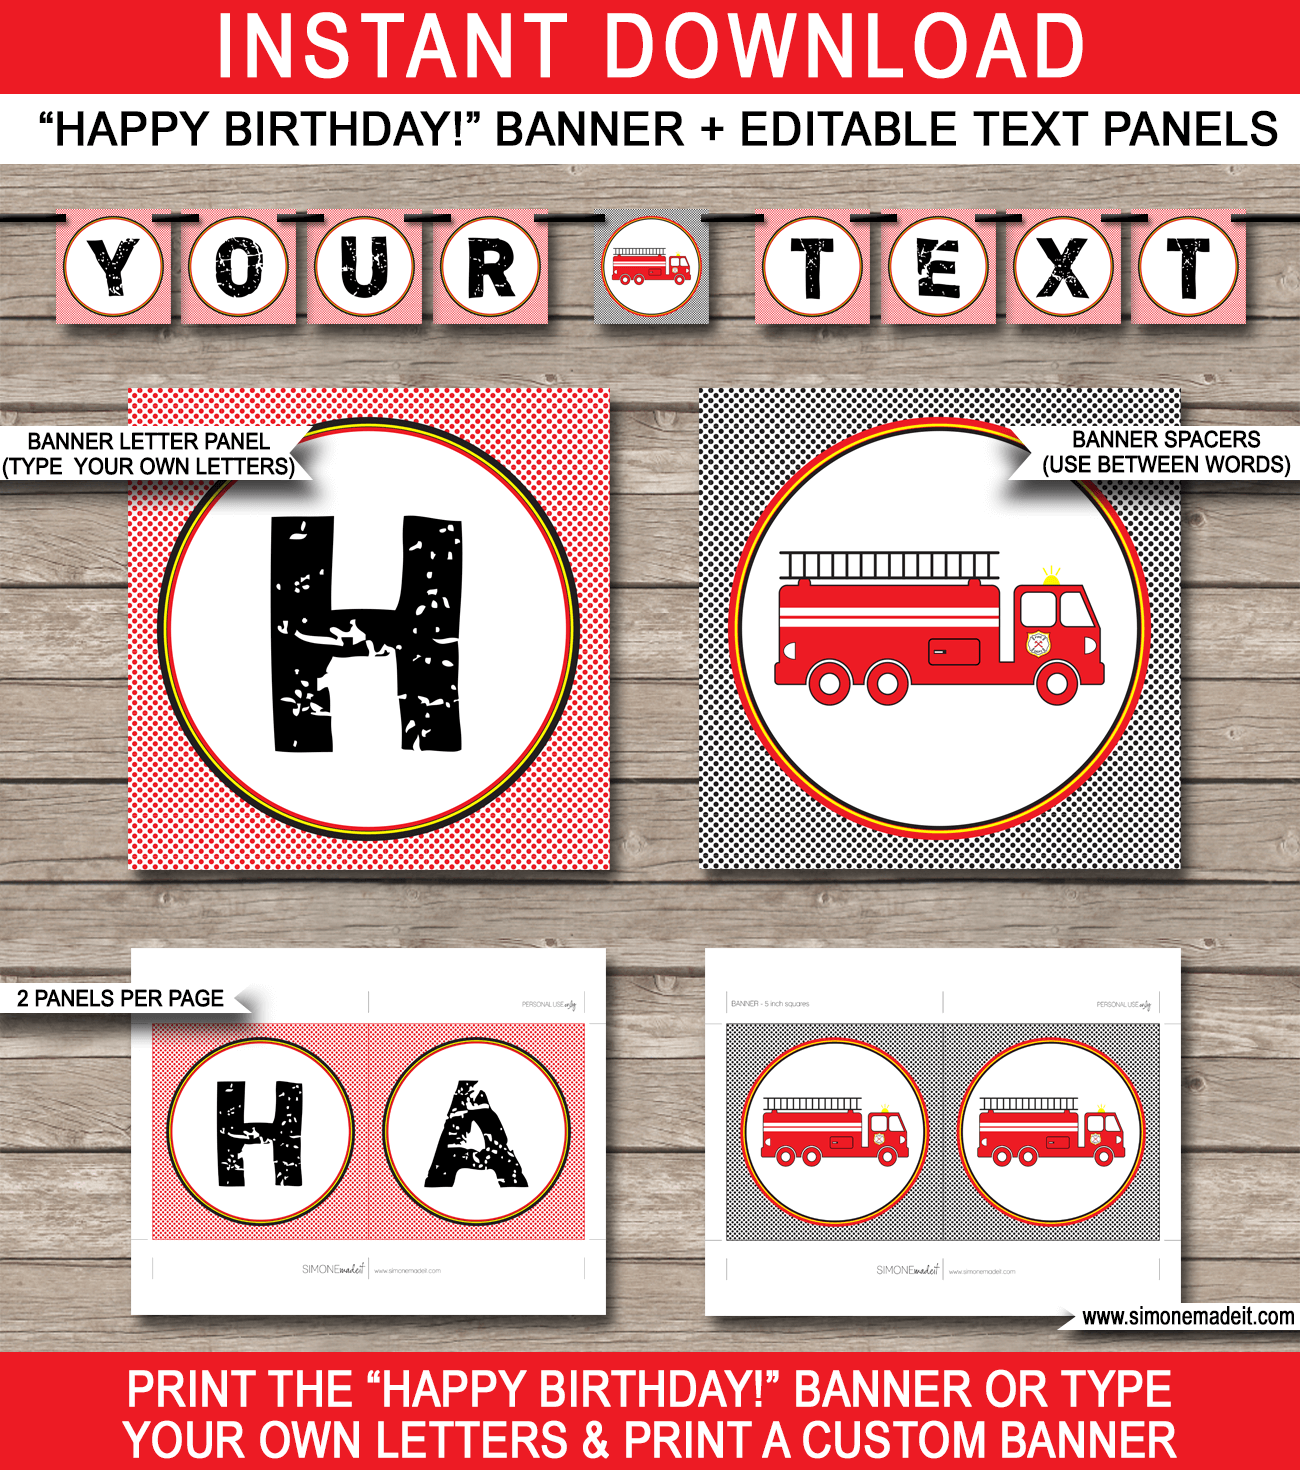 Fireman Party Banner Template - Fireman Bunting - Happy Birthday Banner - Firetruck - Birthday Party - Editable and Printable DIY Template - INSTANT DOWNLOAD $4.50 via simonemadeit.com